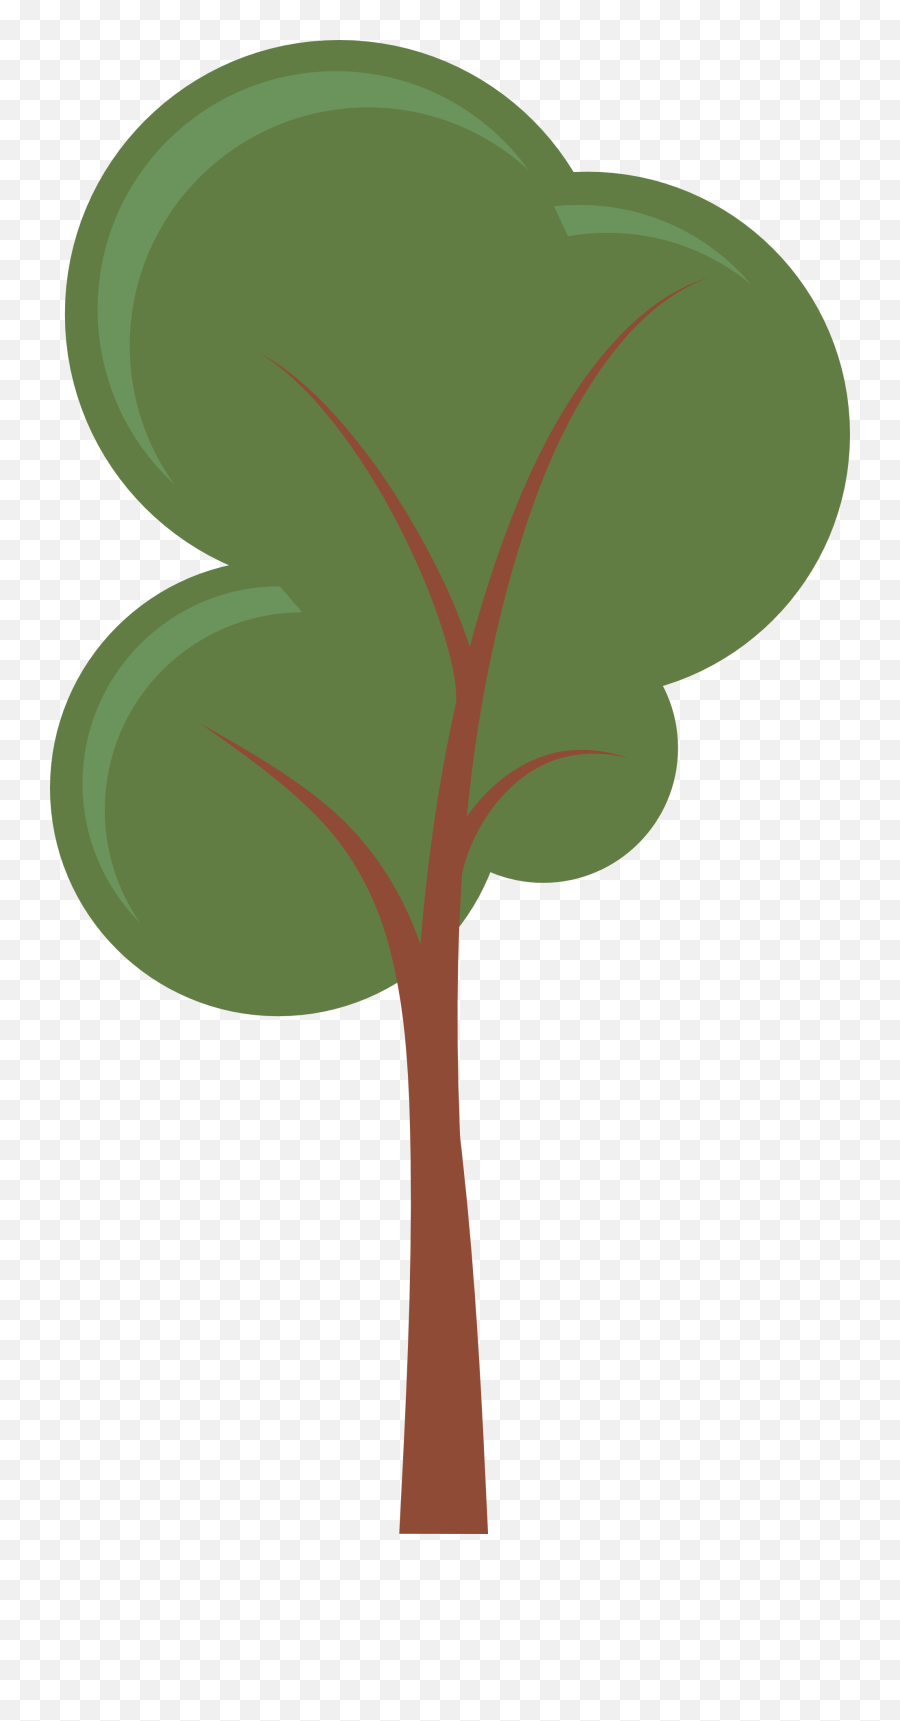 Cartoons Pictures Png Transparent - Tree Vector Png Cartoon,Transparent Cartoons